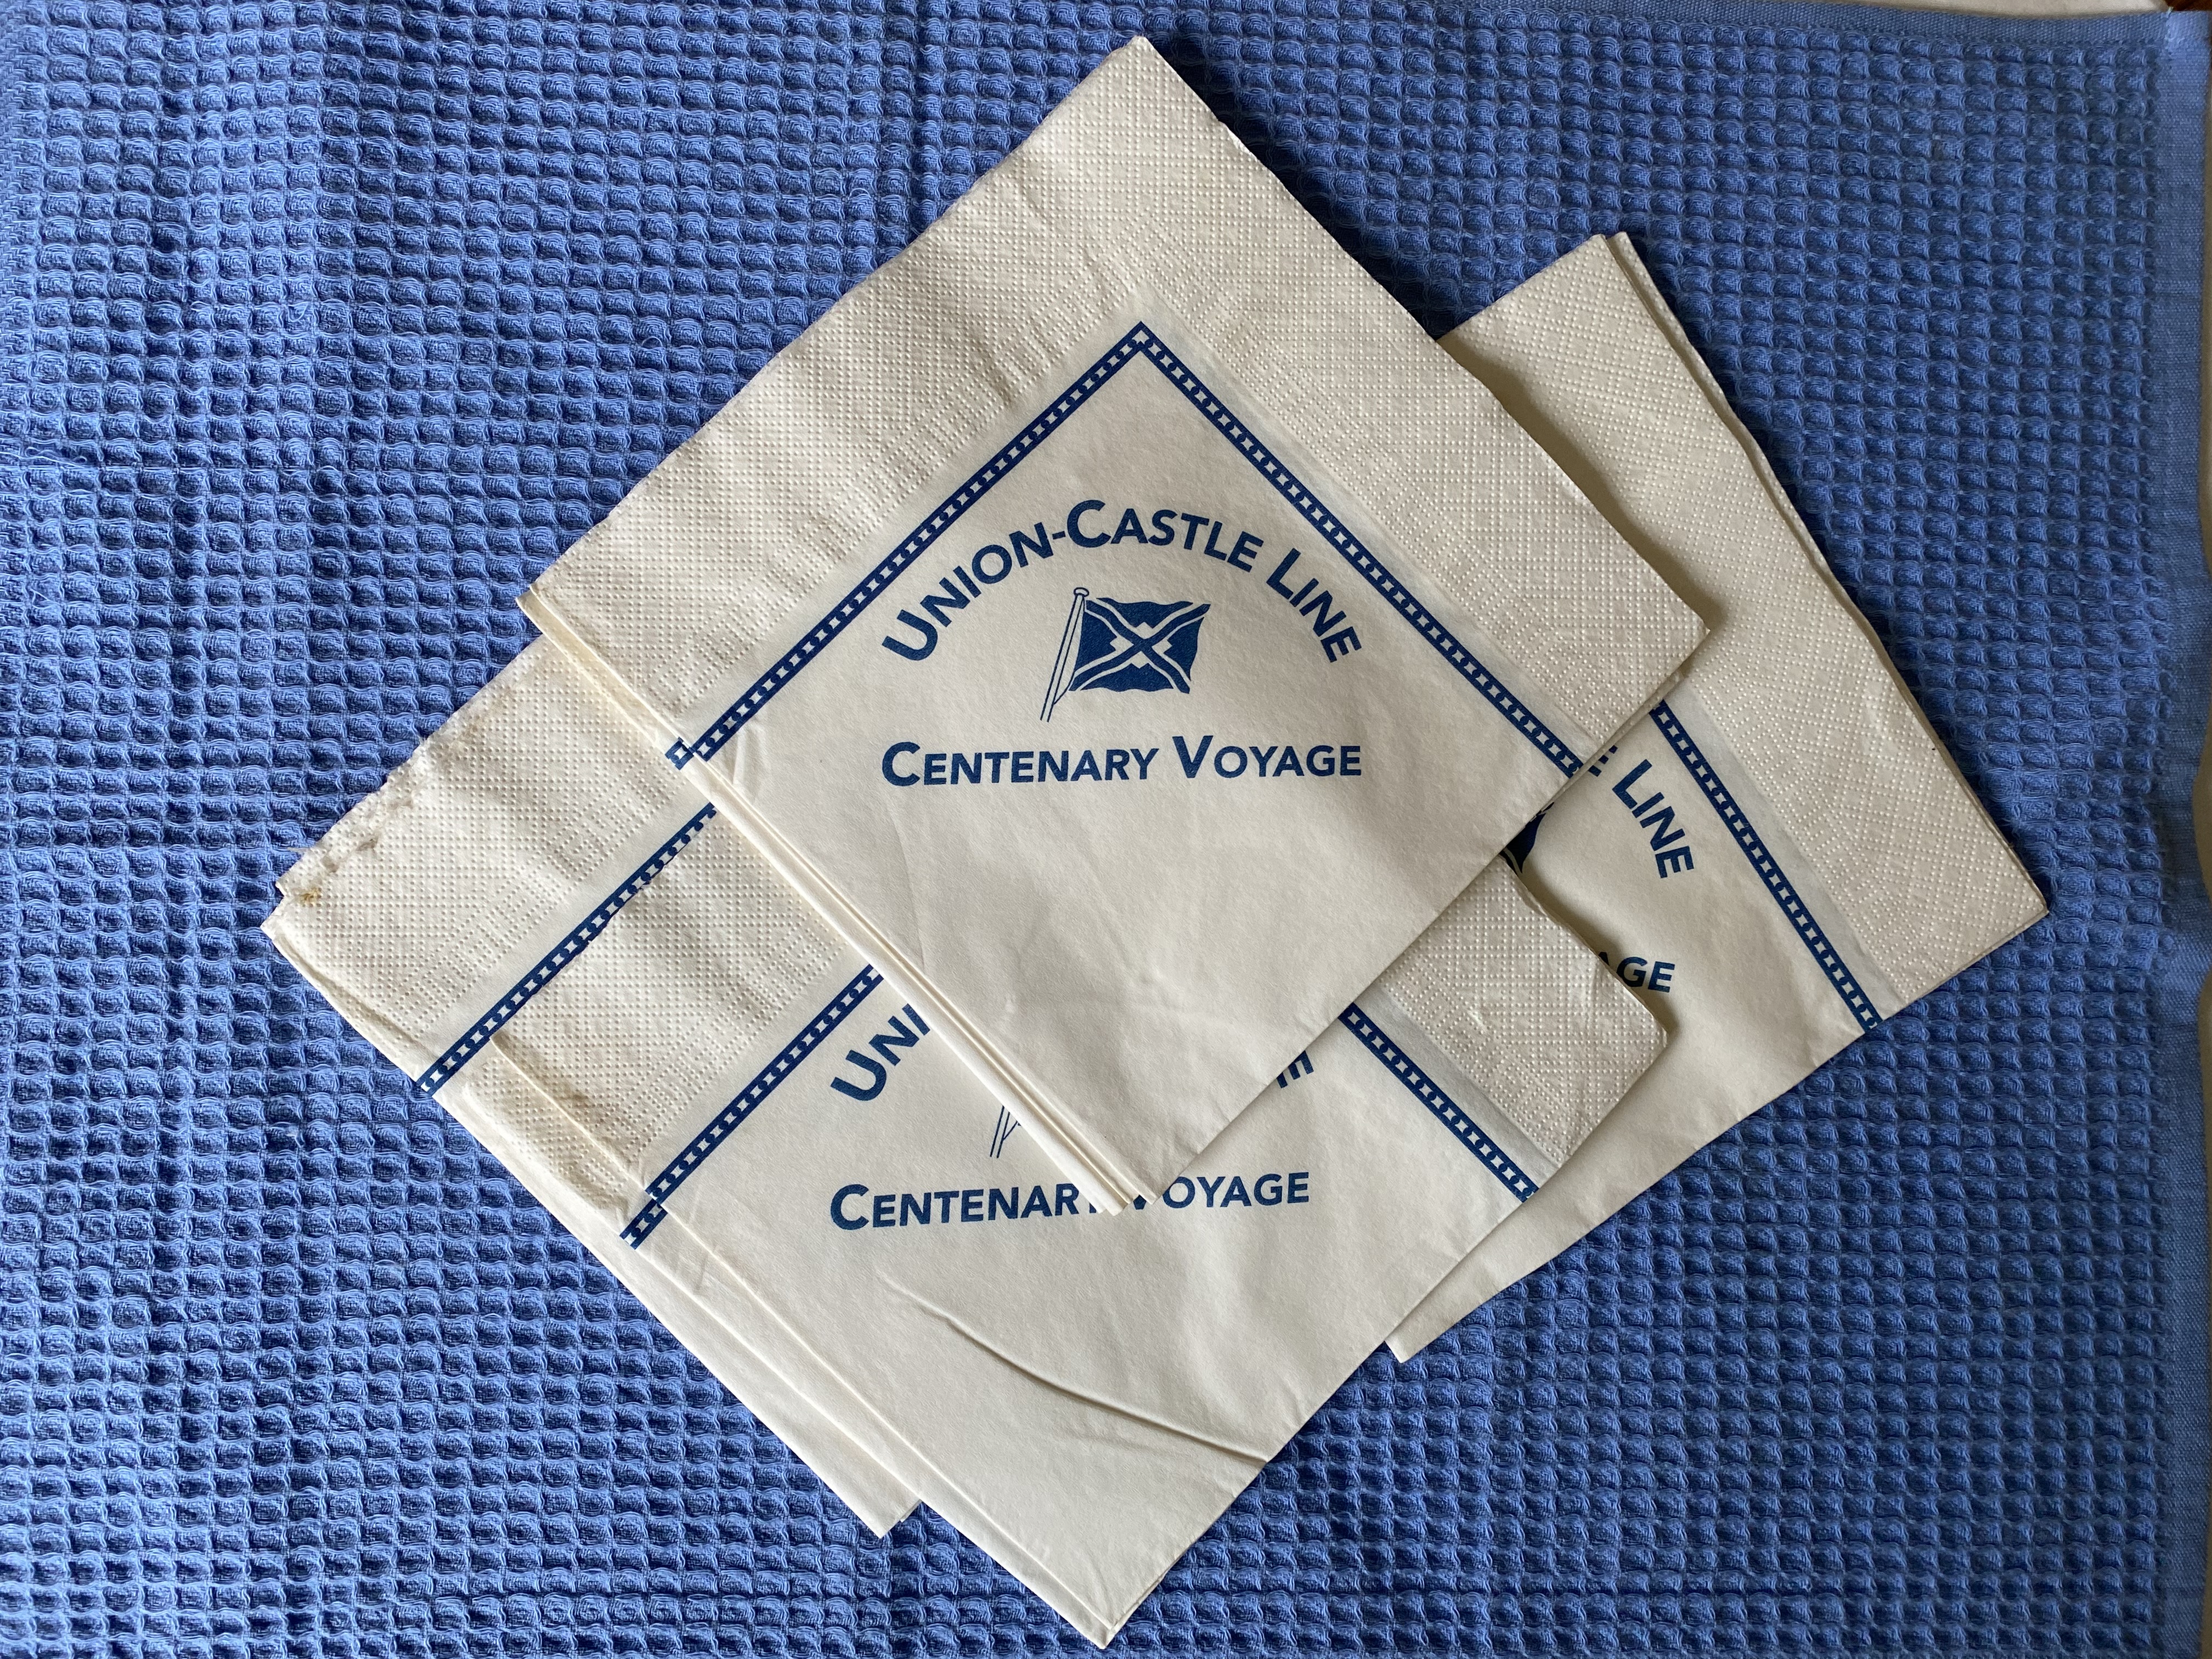 A PACK OF UNUSED PAPER TABLE NAPKINS FROM THE UNION CASTLE LINE CENTENARY VOYAGE ONBOARD THE VICTORIA